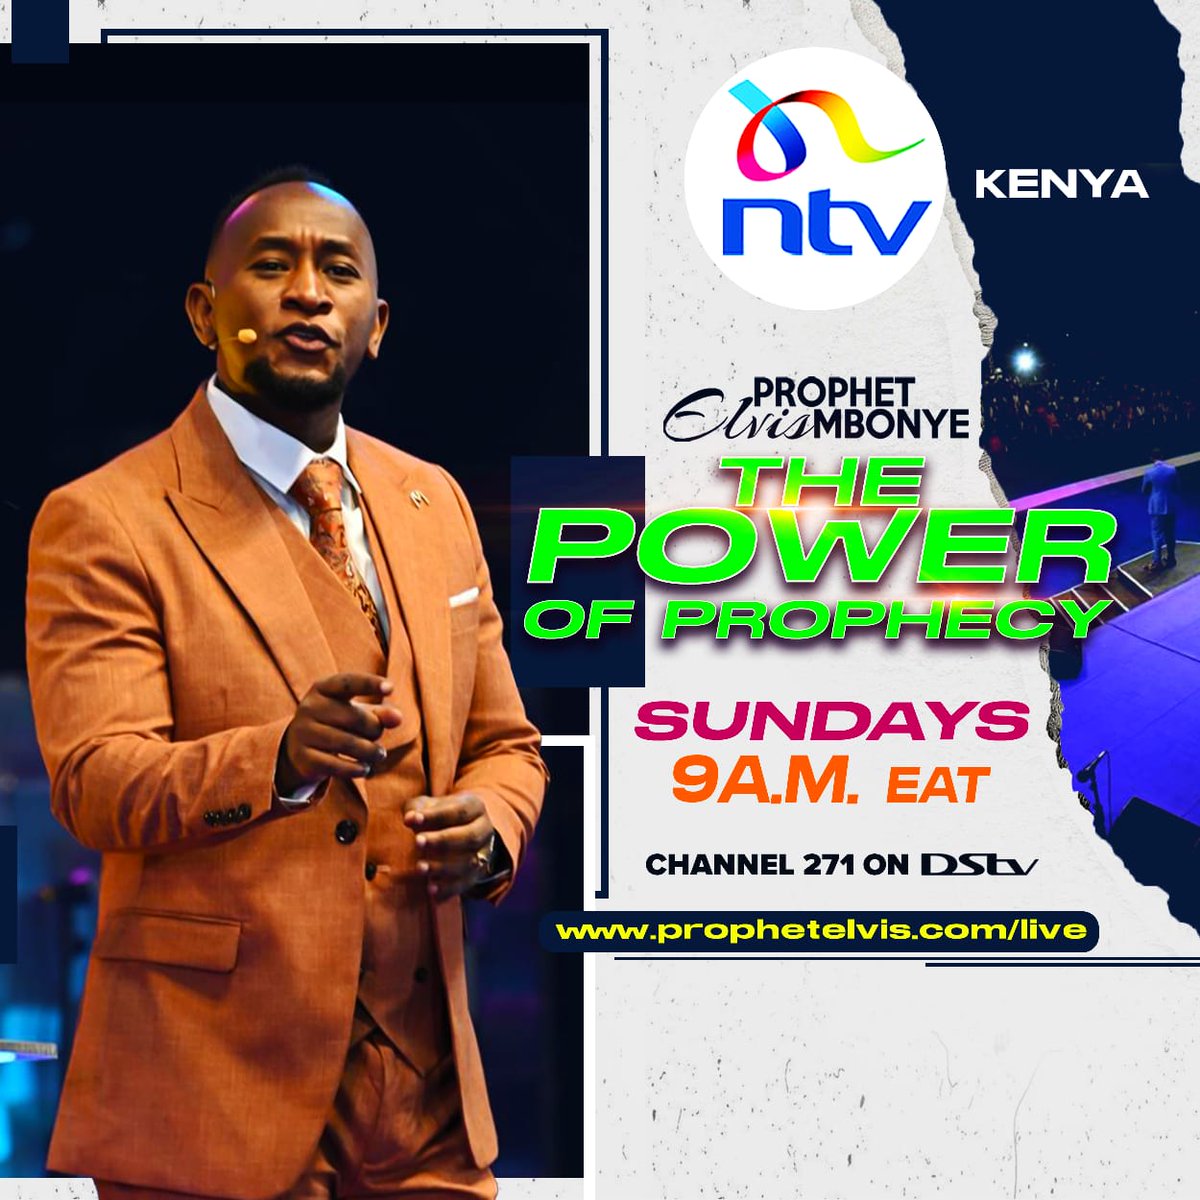 Tune in to NTV Kenya this Sunday at 9:00 A.M. for a captivating episode of 'The Power of Prophecy' by Prophet Elvis Mbonye. #ThePowerofProphecy